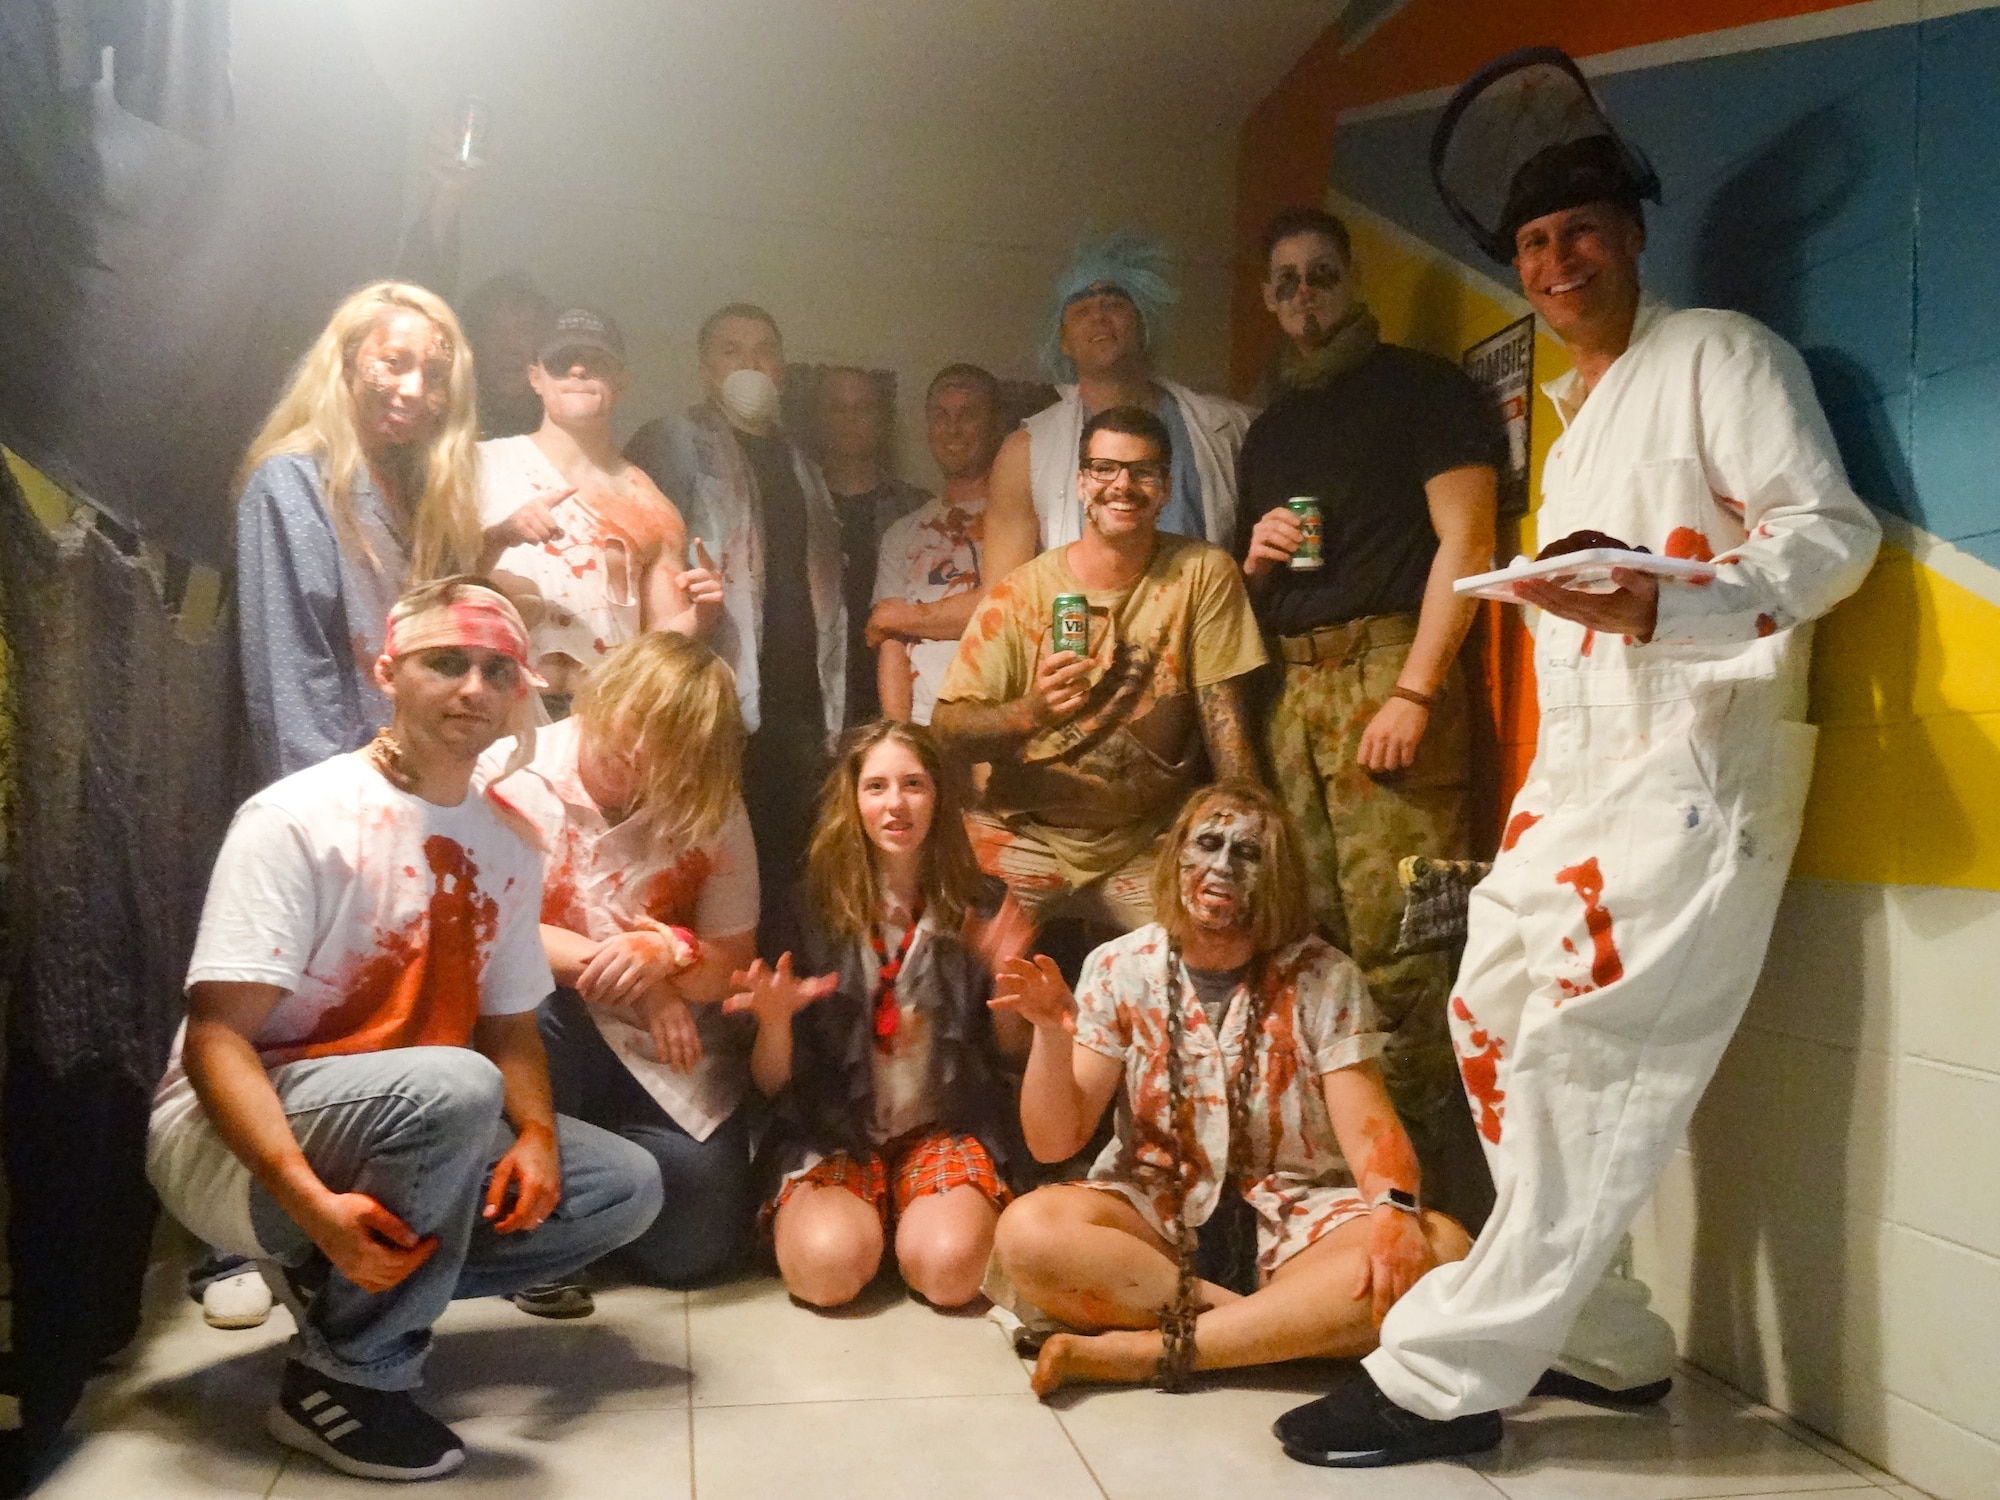 Haunted house performers pose for a group photo during a Halloween party held at the Sunspot Community Center, Learmonth, Australia, Oct. 31, 2018. Every year, members of 2nd Weather Squadron’s Detachment 1 host a haunted house and offer trick-or-treating and games to the residents in the nearby town of Exmouth. (Courtesy Photo)